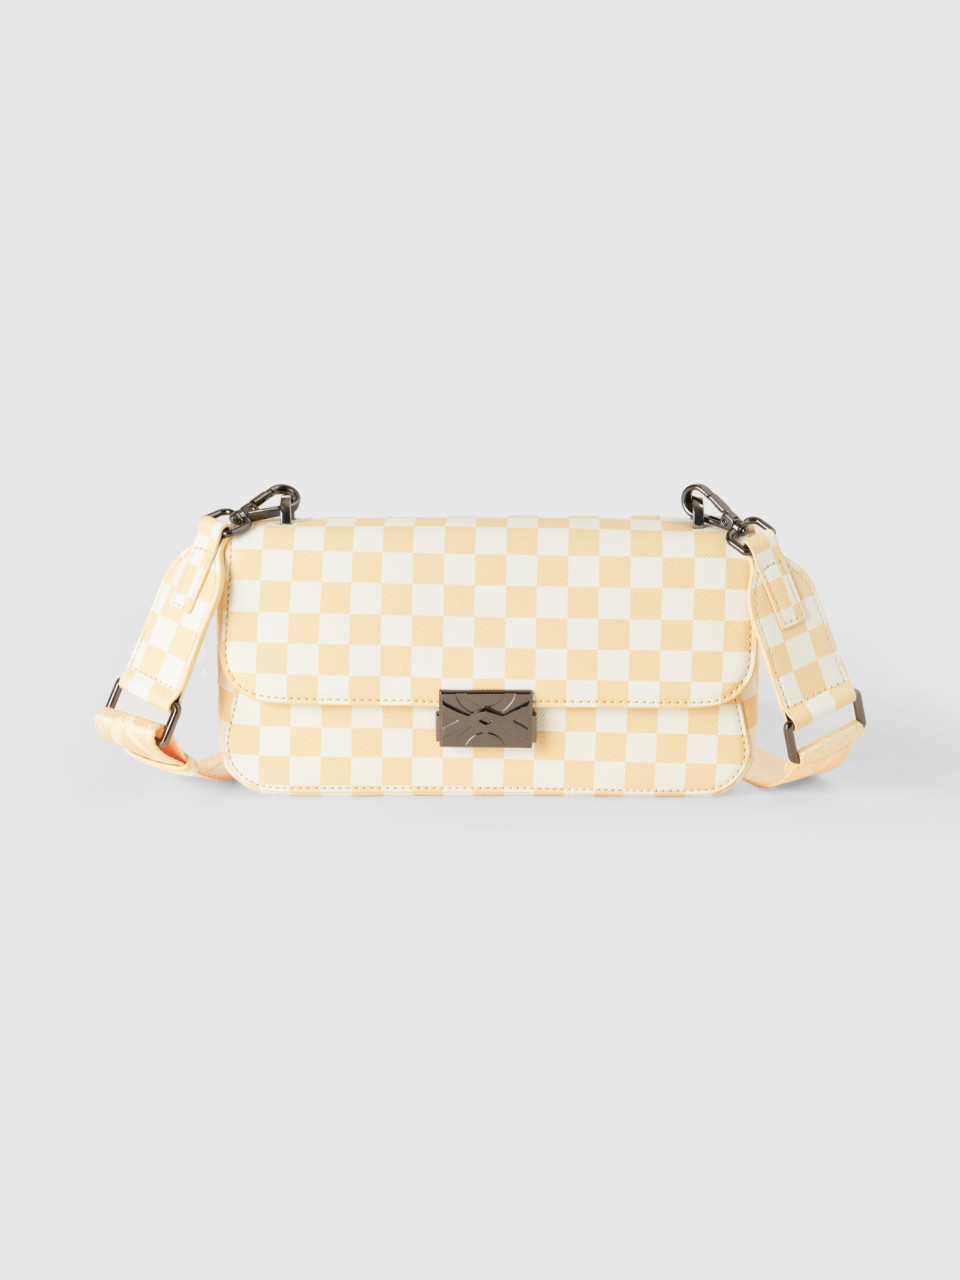 Benetton, Medium Be Bag In White And Yellow Checkers, Multi-color, Women